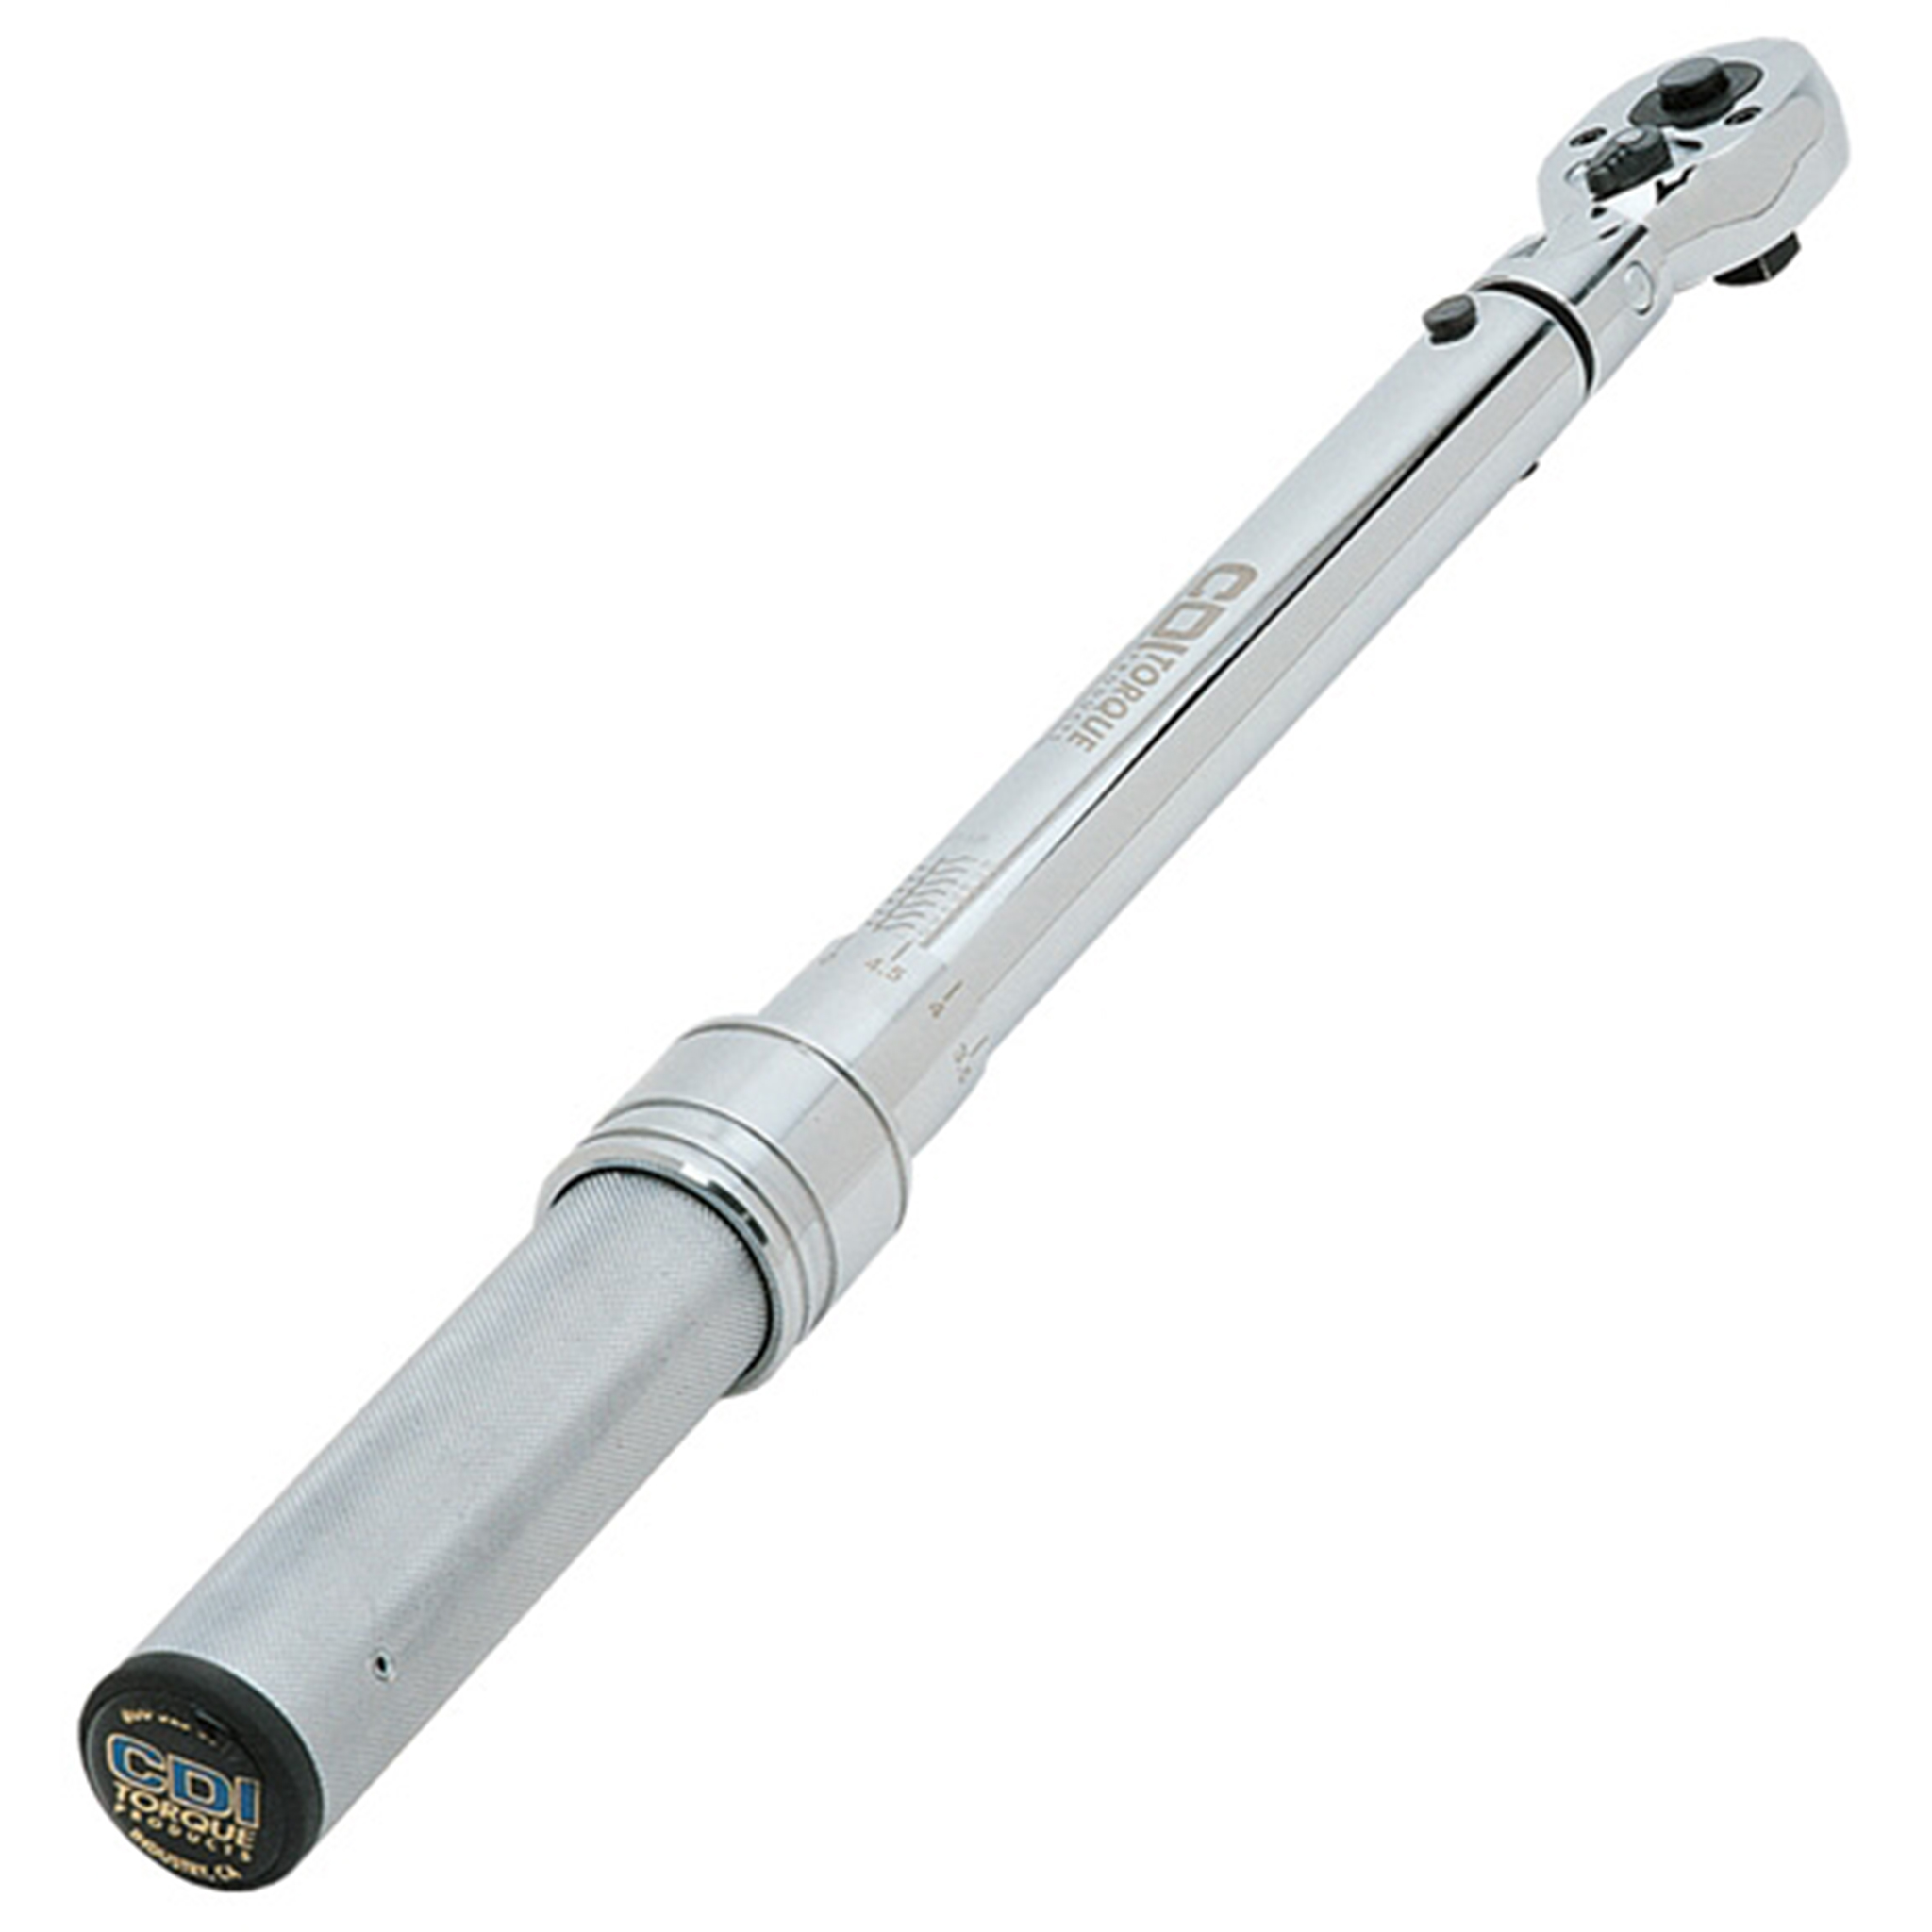 Snap-on Industrial Brands Torque Wrench, 1/4", 20-150in.lb (2.8-15.3Nm)